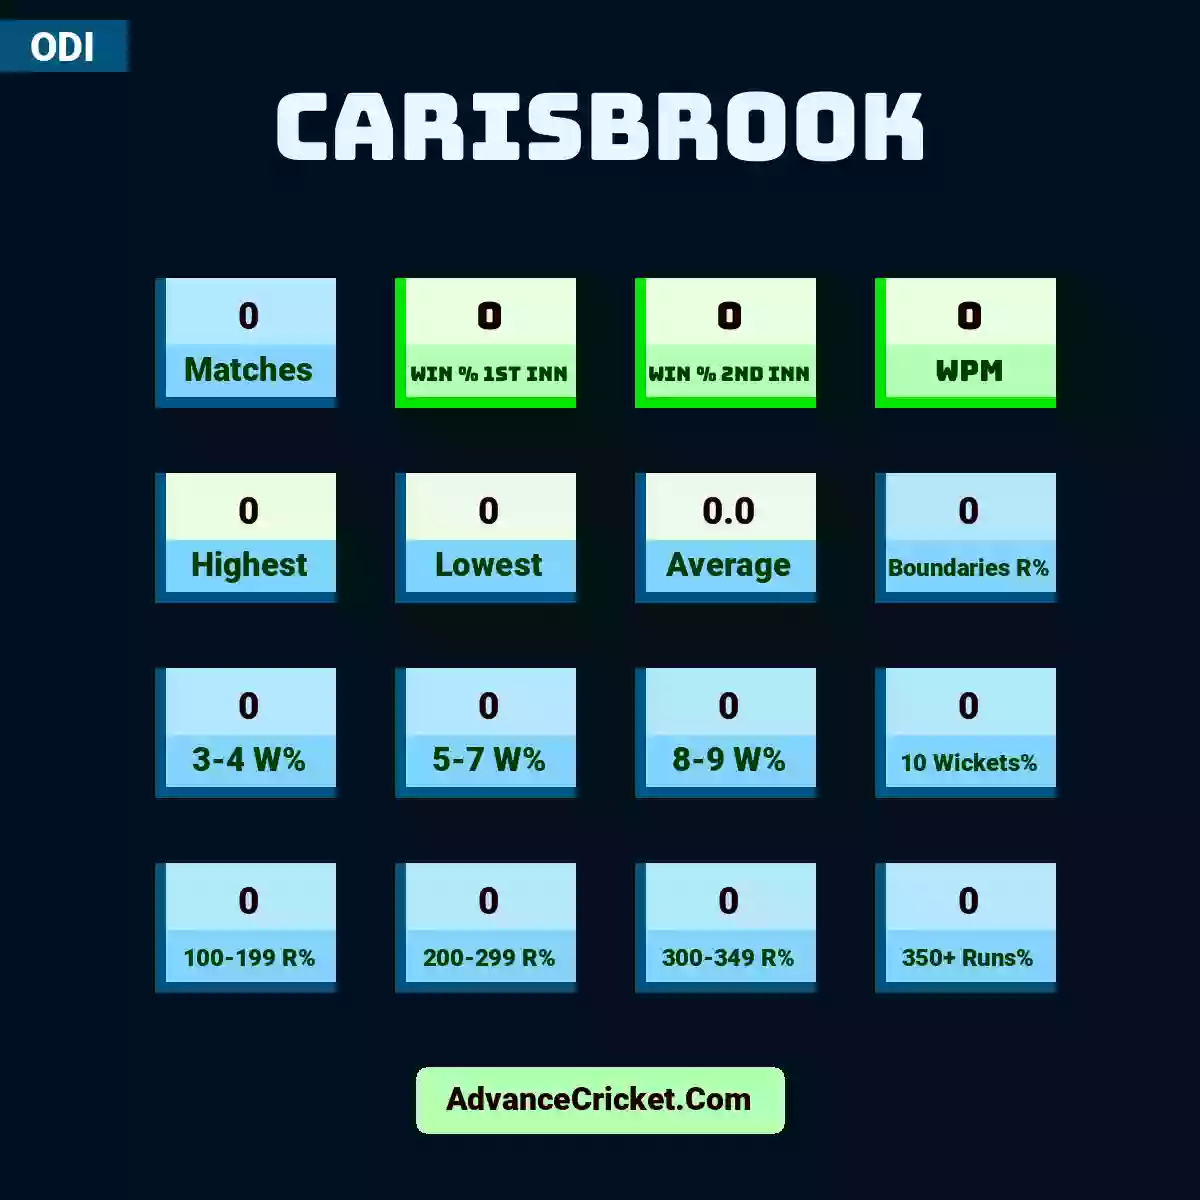 Image showing Carisbrook with Matches: 0, Win % 1st Inn: 0, Win % 2nd Inn: 0, WPM: 0, Highest: 0, Lowest: 0, Average: 0.0, Boundaries R%: 0, 3-4 W%: 0, 5-7 W%: 0, 8-9 W%: 0, 10 Wickets%: 0, 100-199 R%: 0, 200-299 R%: 0, 300-349 R%: 0, 350+ Runs%: 0.